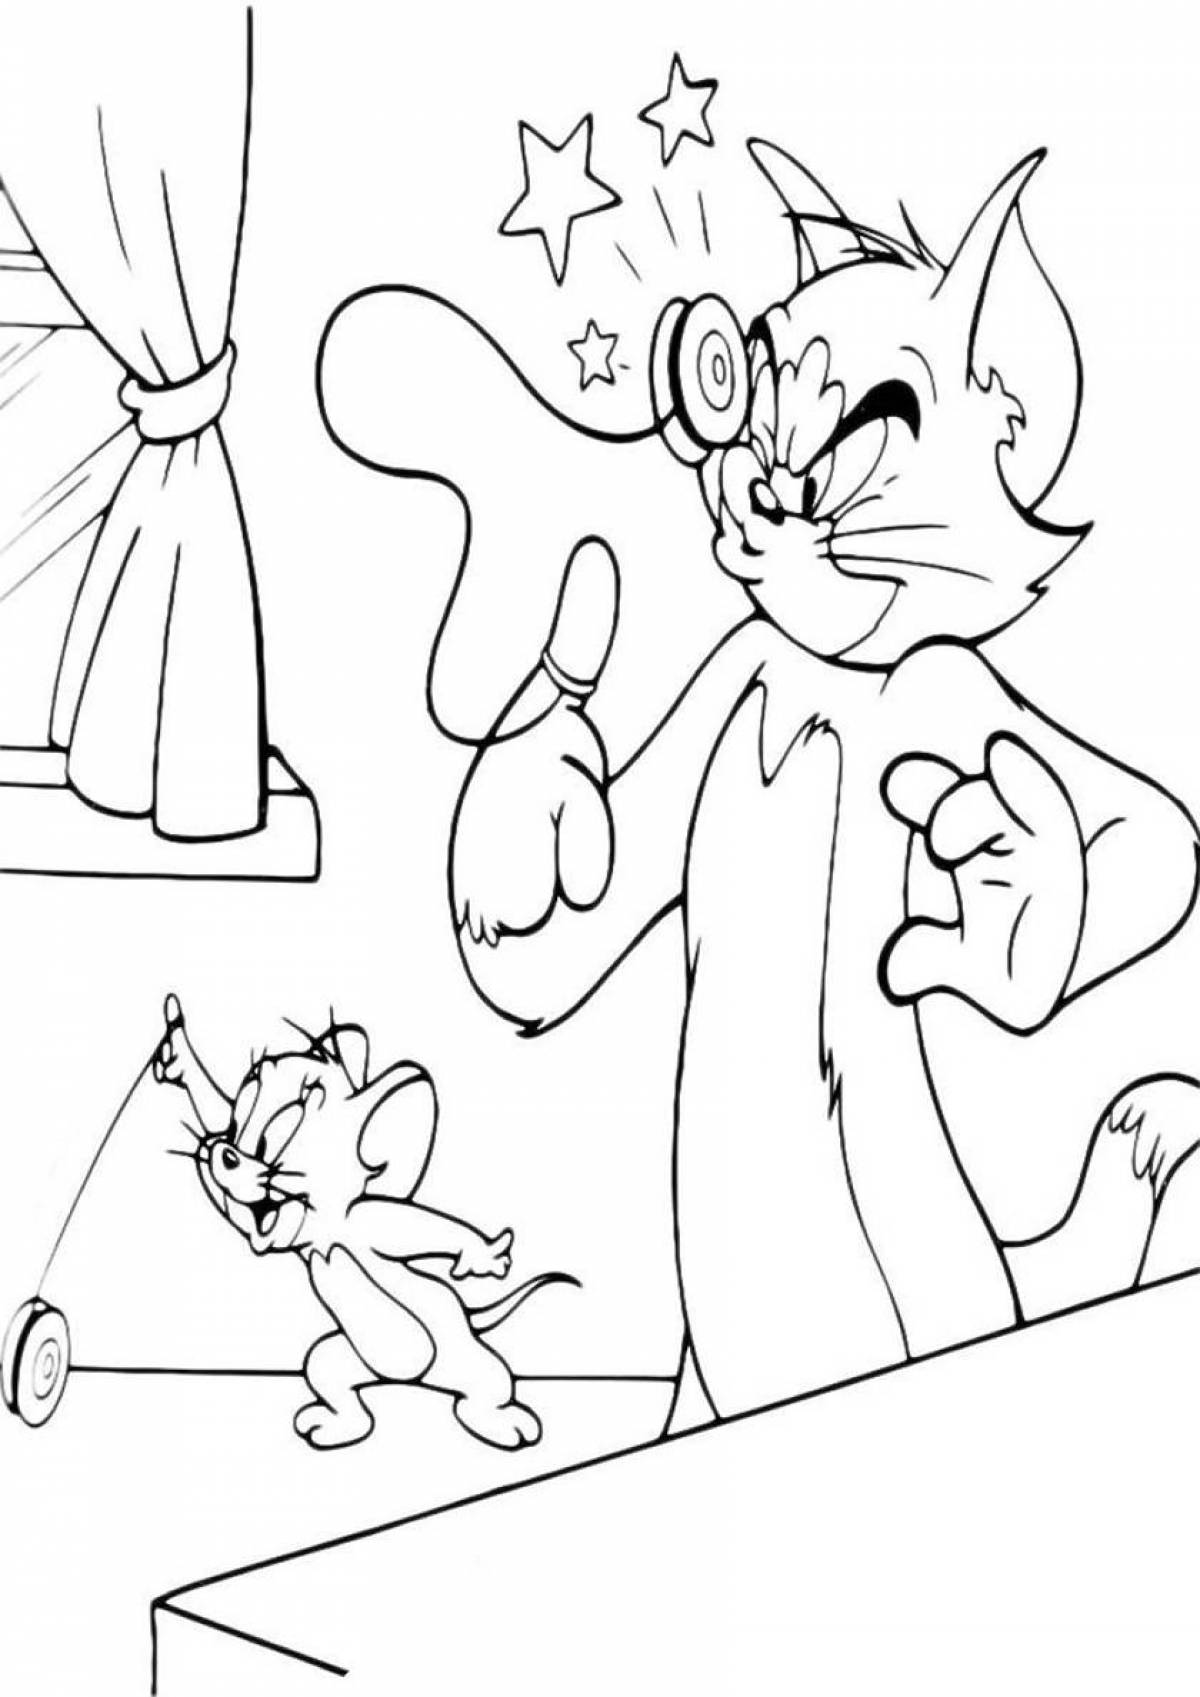 Colourful tom and jerry coloring pages for kids